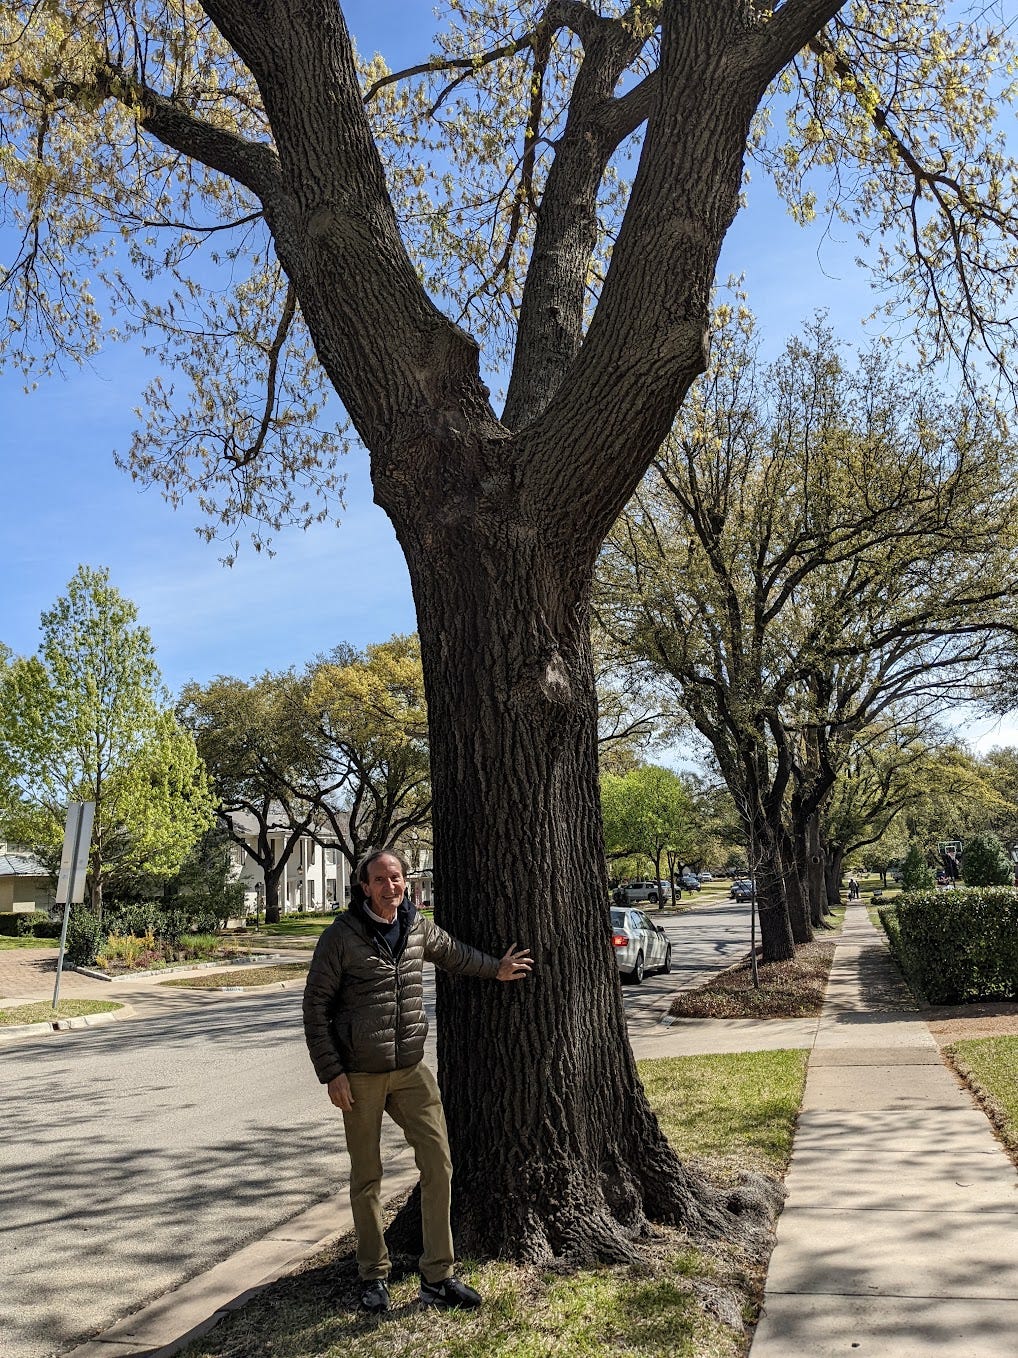 a man in a green jacket and khakis smiles while touching a large tree, on the sidewalk of a residential neighborhood